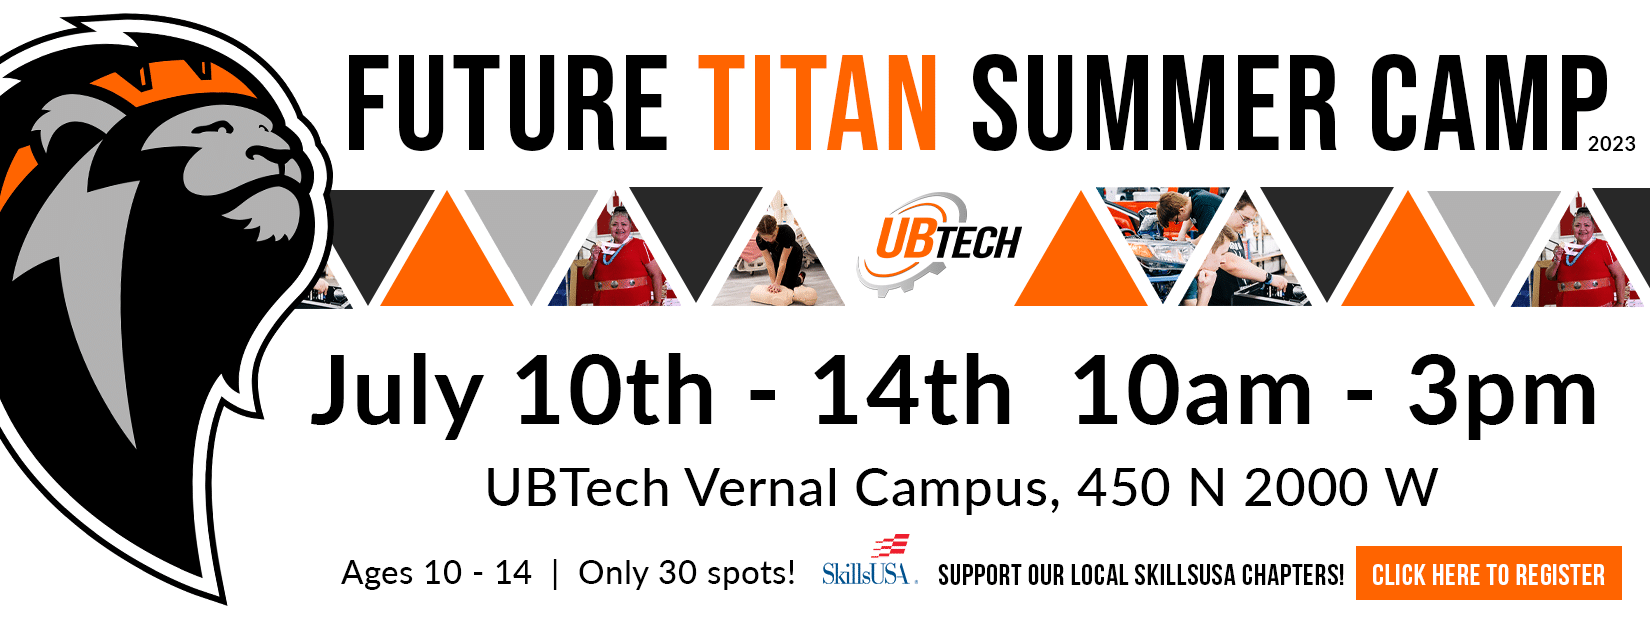 Future Titan Summer Camp. July 10th through 14th; 10am to 3pm. UBTech Vernal Campus, 450 N 2000 W. Ages 10-14. Only 30 spots available. 